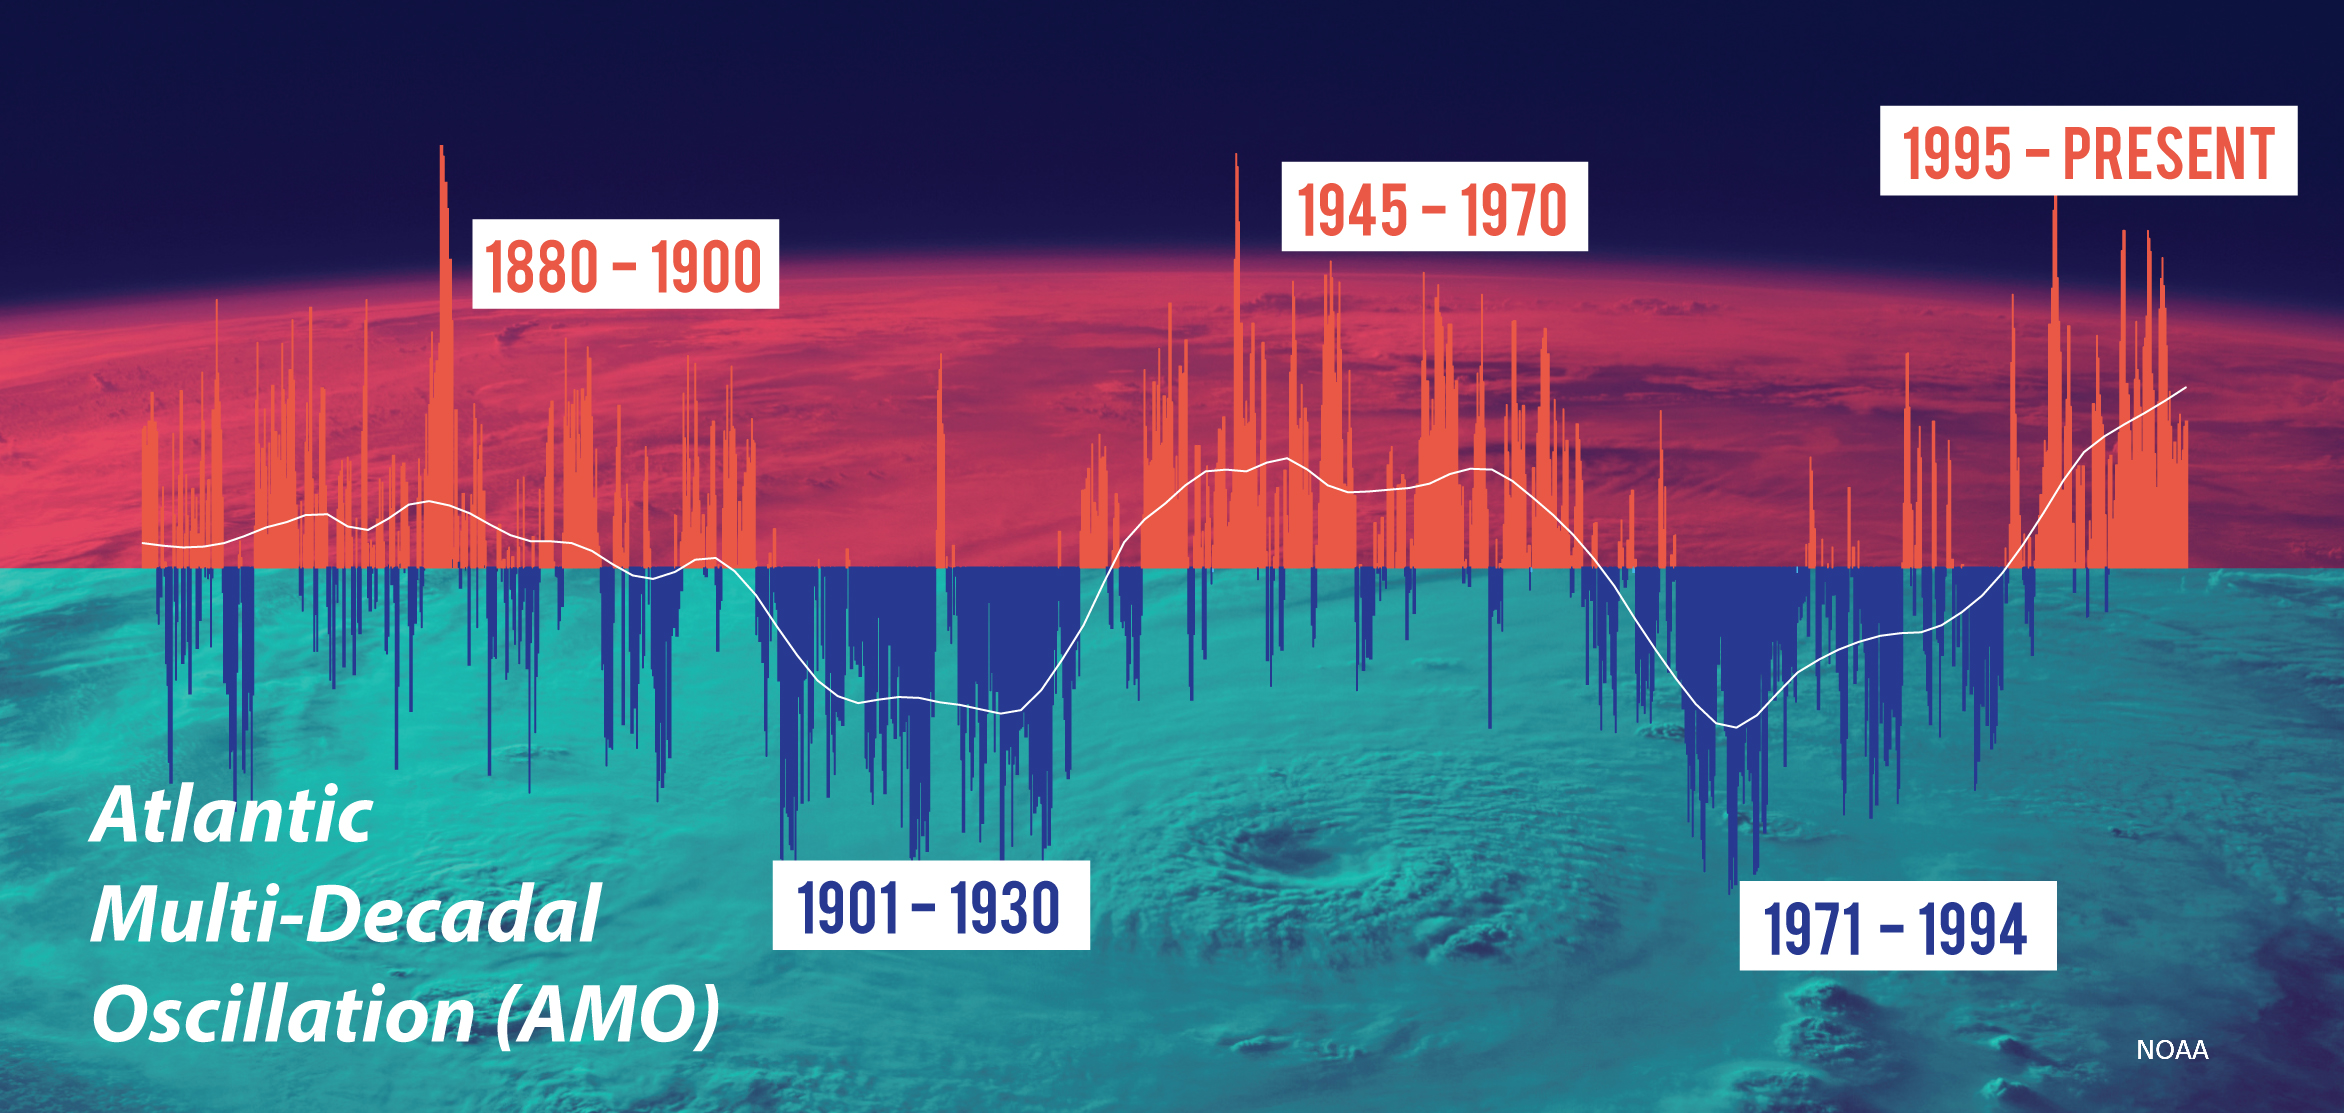 Consistent with the changing phases of the Atlantic Multi-Decadal Oscillation (AMO),  Atlantic high-activity eras have occurred from 1880 to 1900, 1945 to 1970 and 1995 to the present. Low-activity eras occurred during 1901-1930 and 1971-1994. High-activity eras in the Atlantic can  increase the frequency and intensity of hurricanes.
